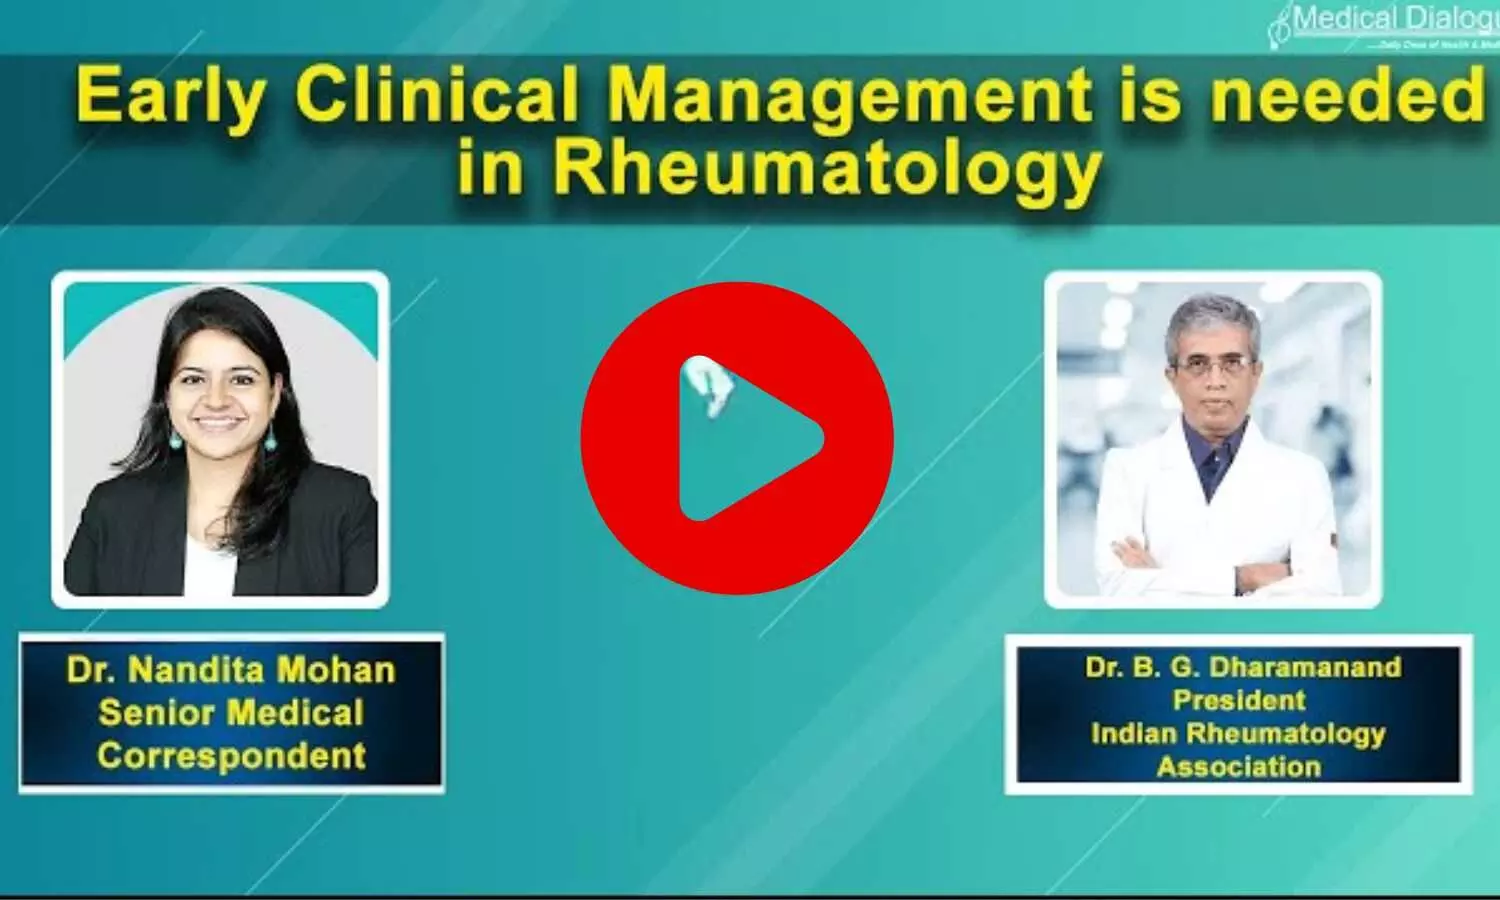 Early diagnosis, Clinical management:The key for Rheumatology- Ft. Dr. B. G. Dharamanand